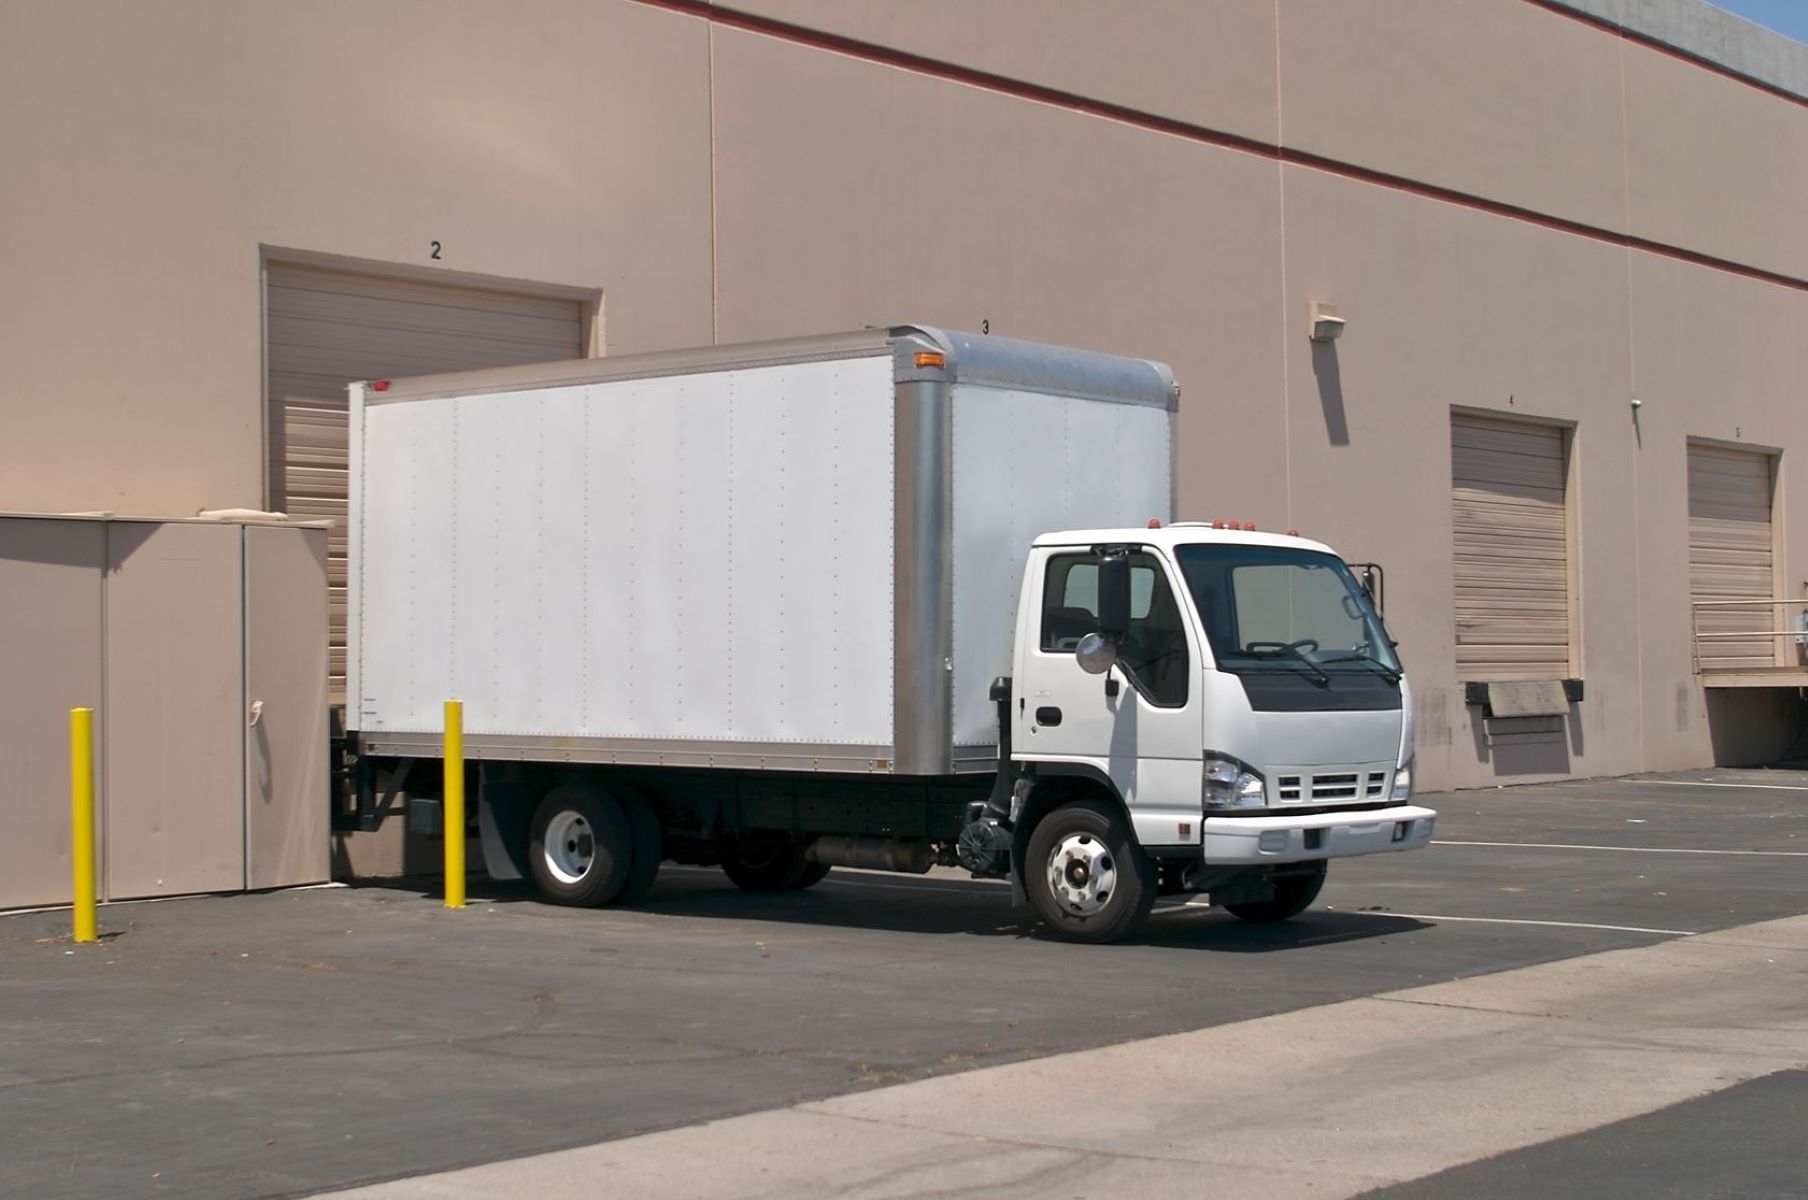 How To Start A Successful Box Truck Company In Houston, Texas: A Step-by-Step Guide